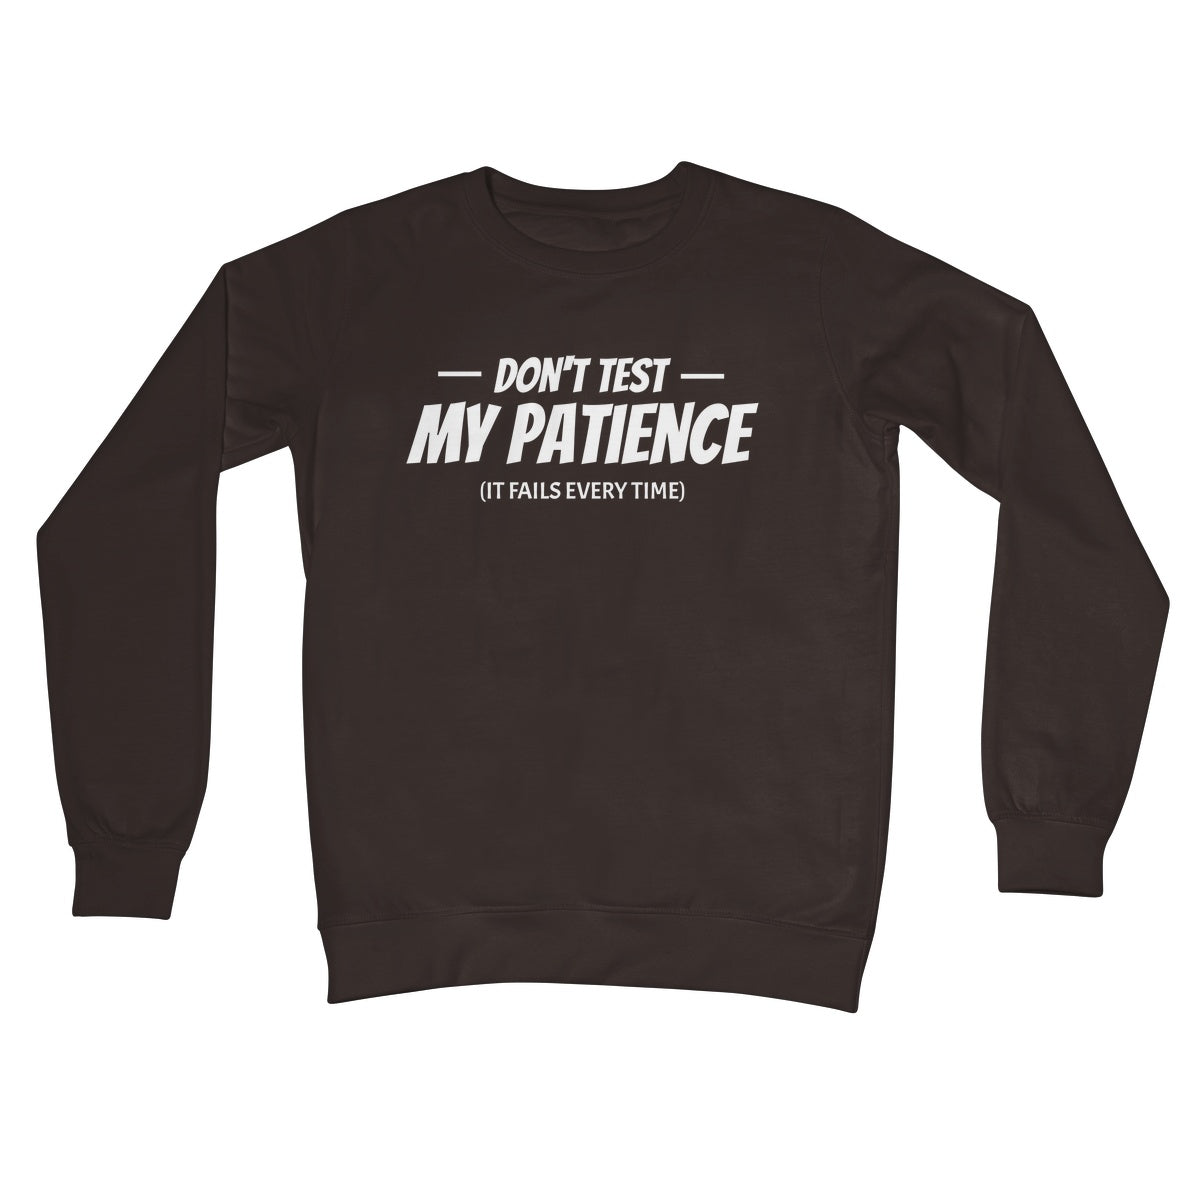 do not test my patience jumper brown